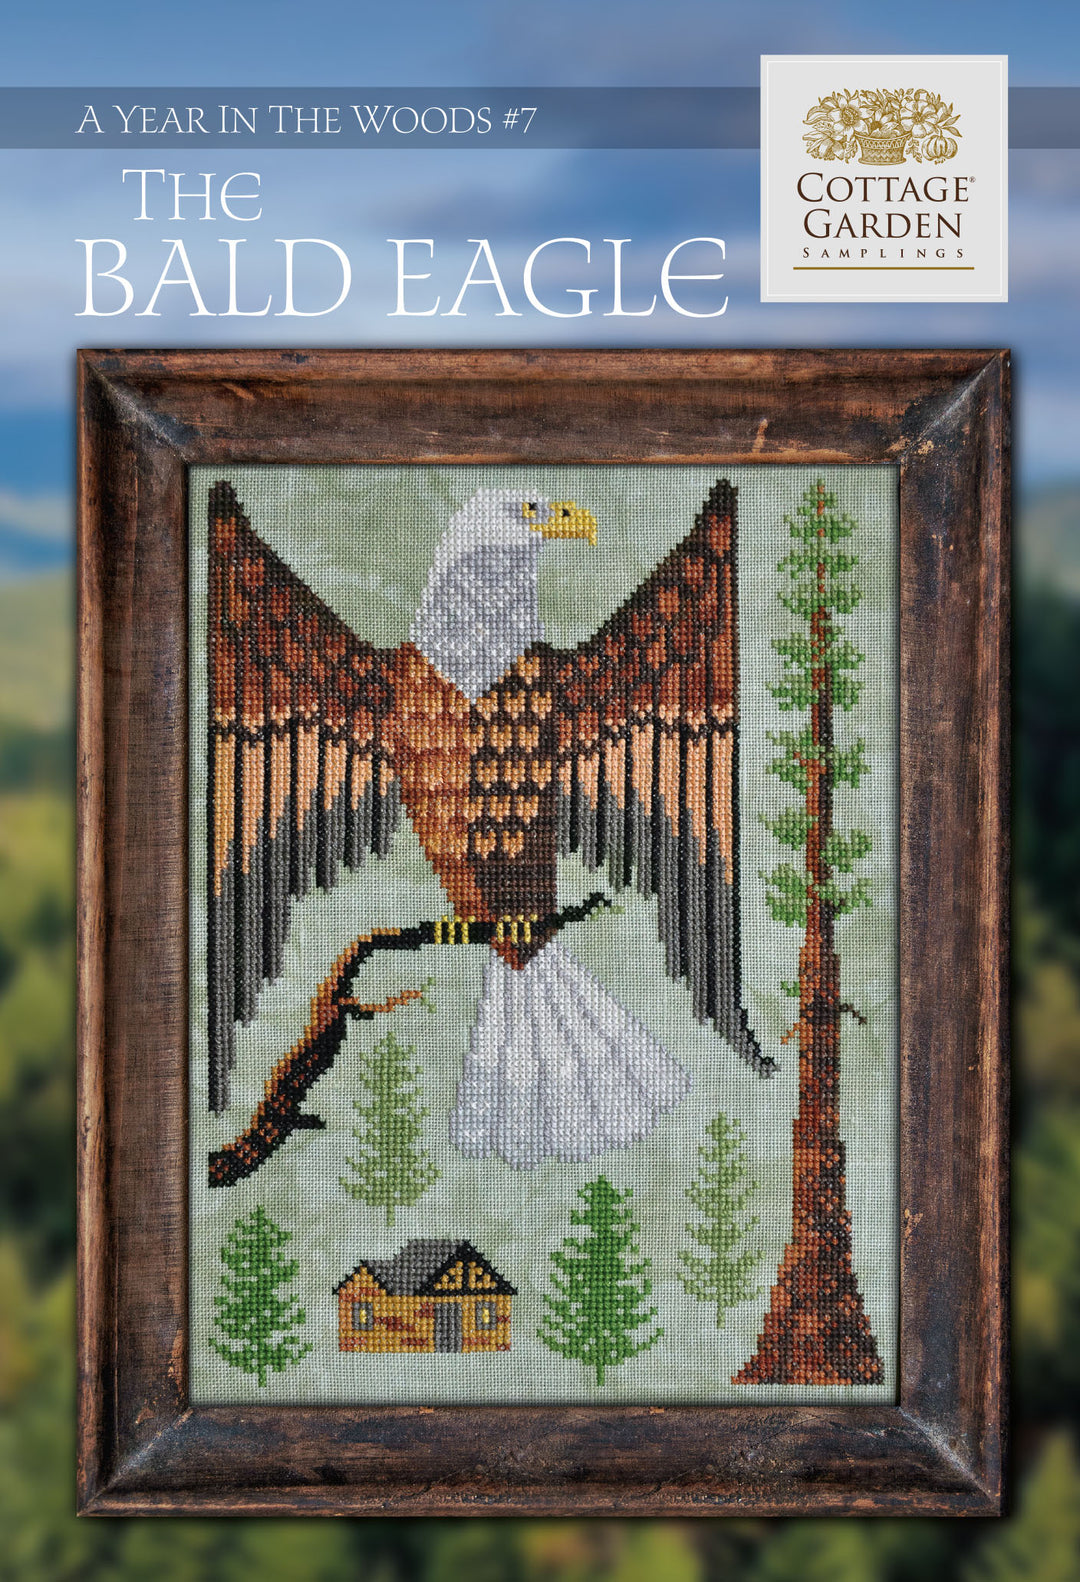 The Bald Eagle, A Year in the Woods #7 | Cottage Garden Samplings